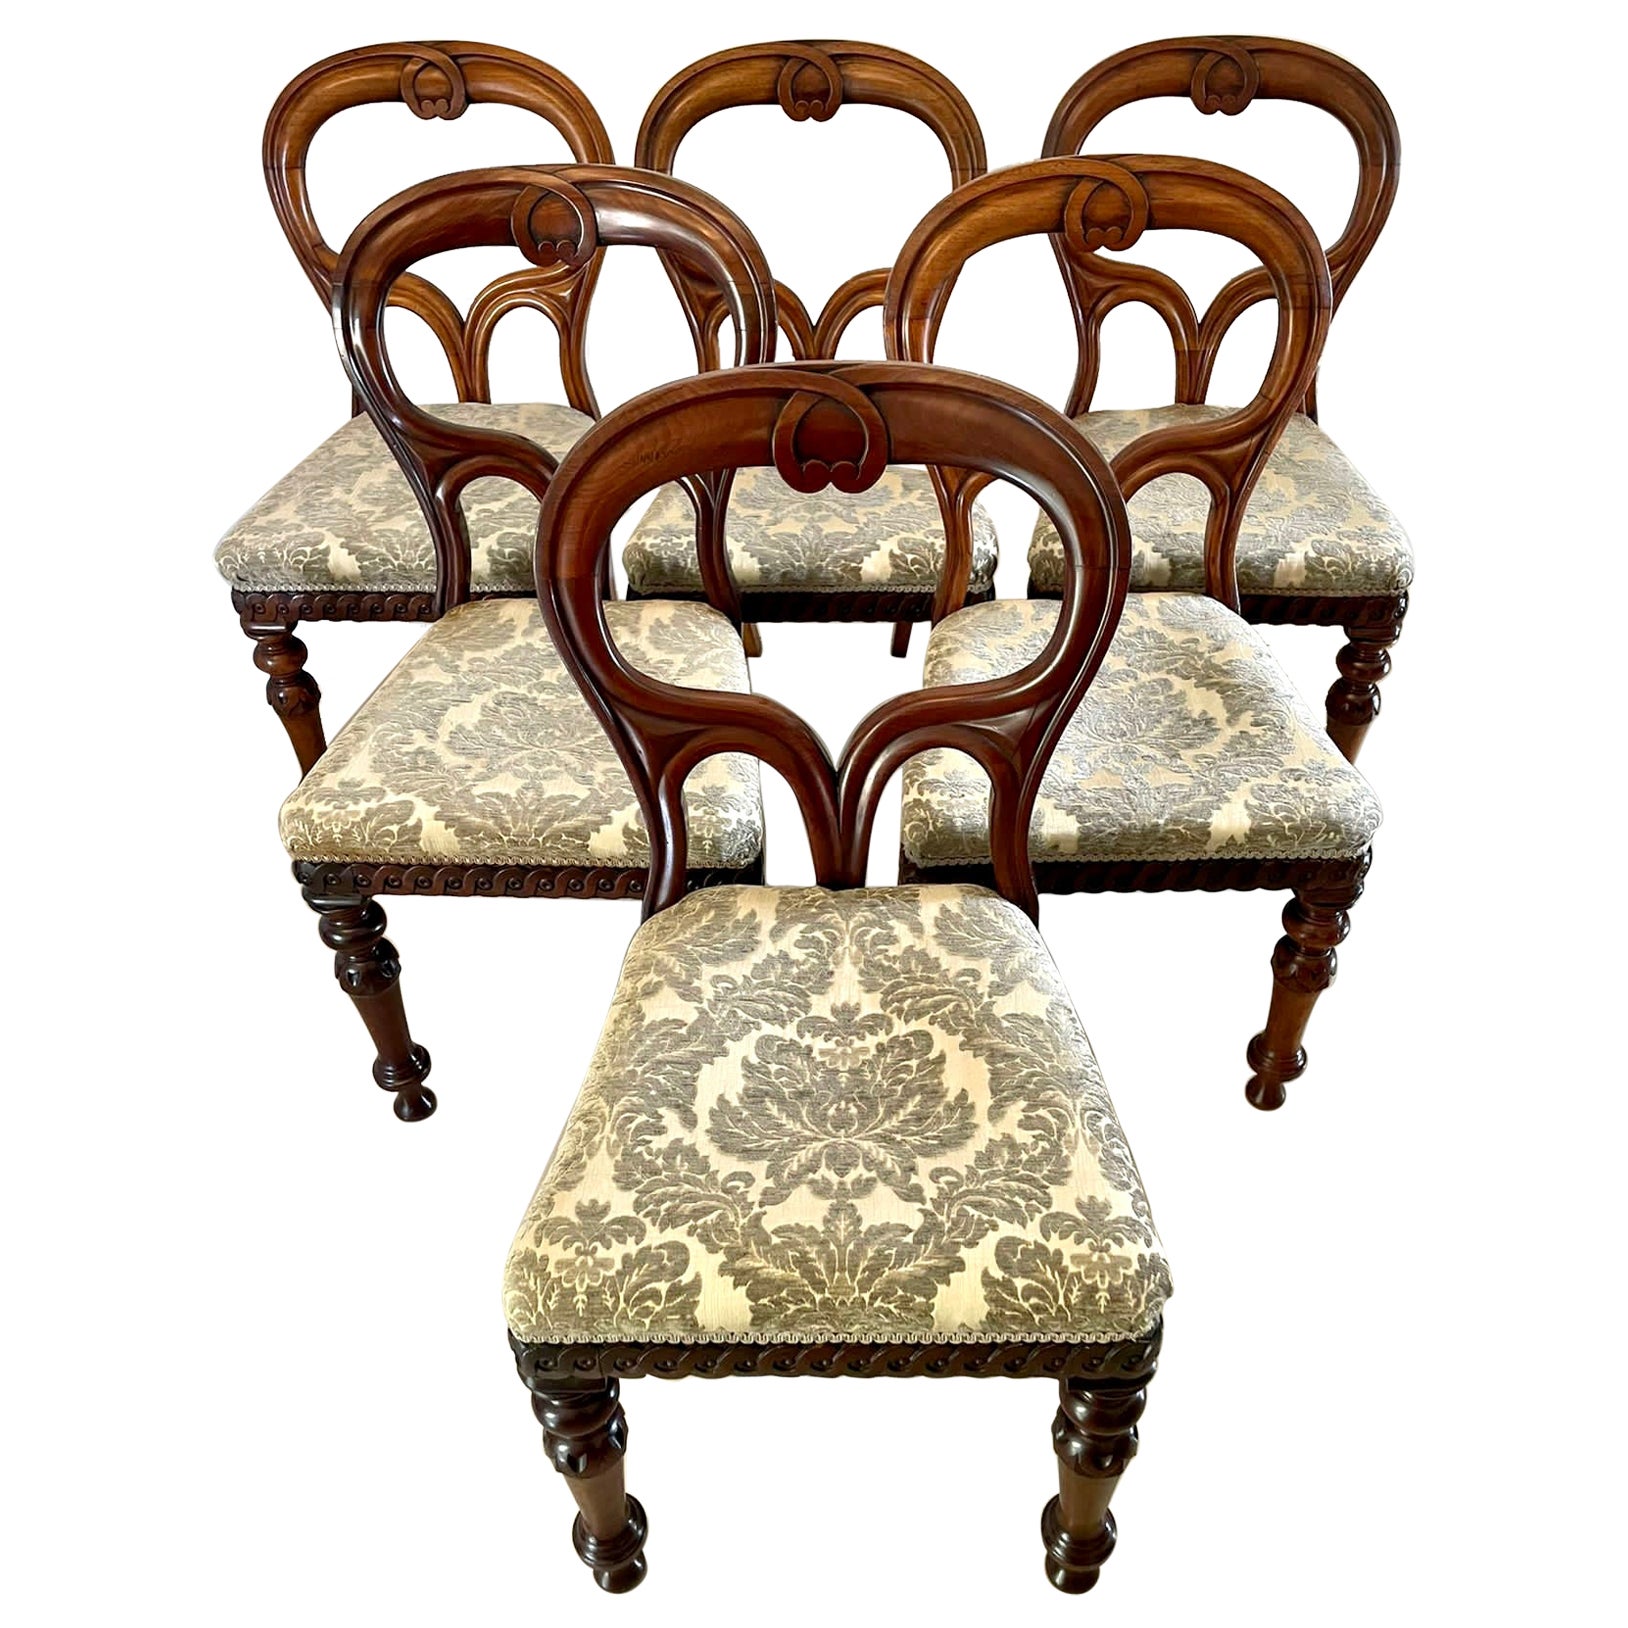 Outstanding Set of 6 Antique Mahogany Scottish Balloon Back Dining Chairs